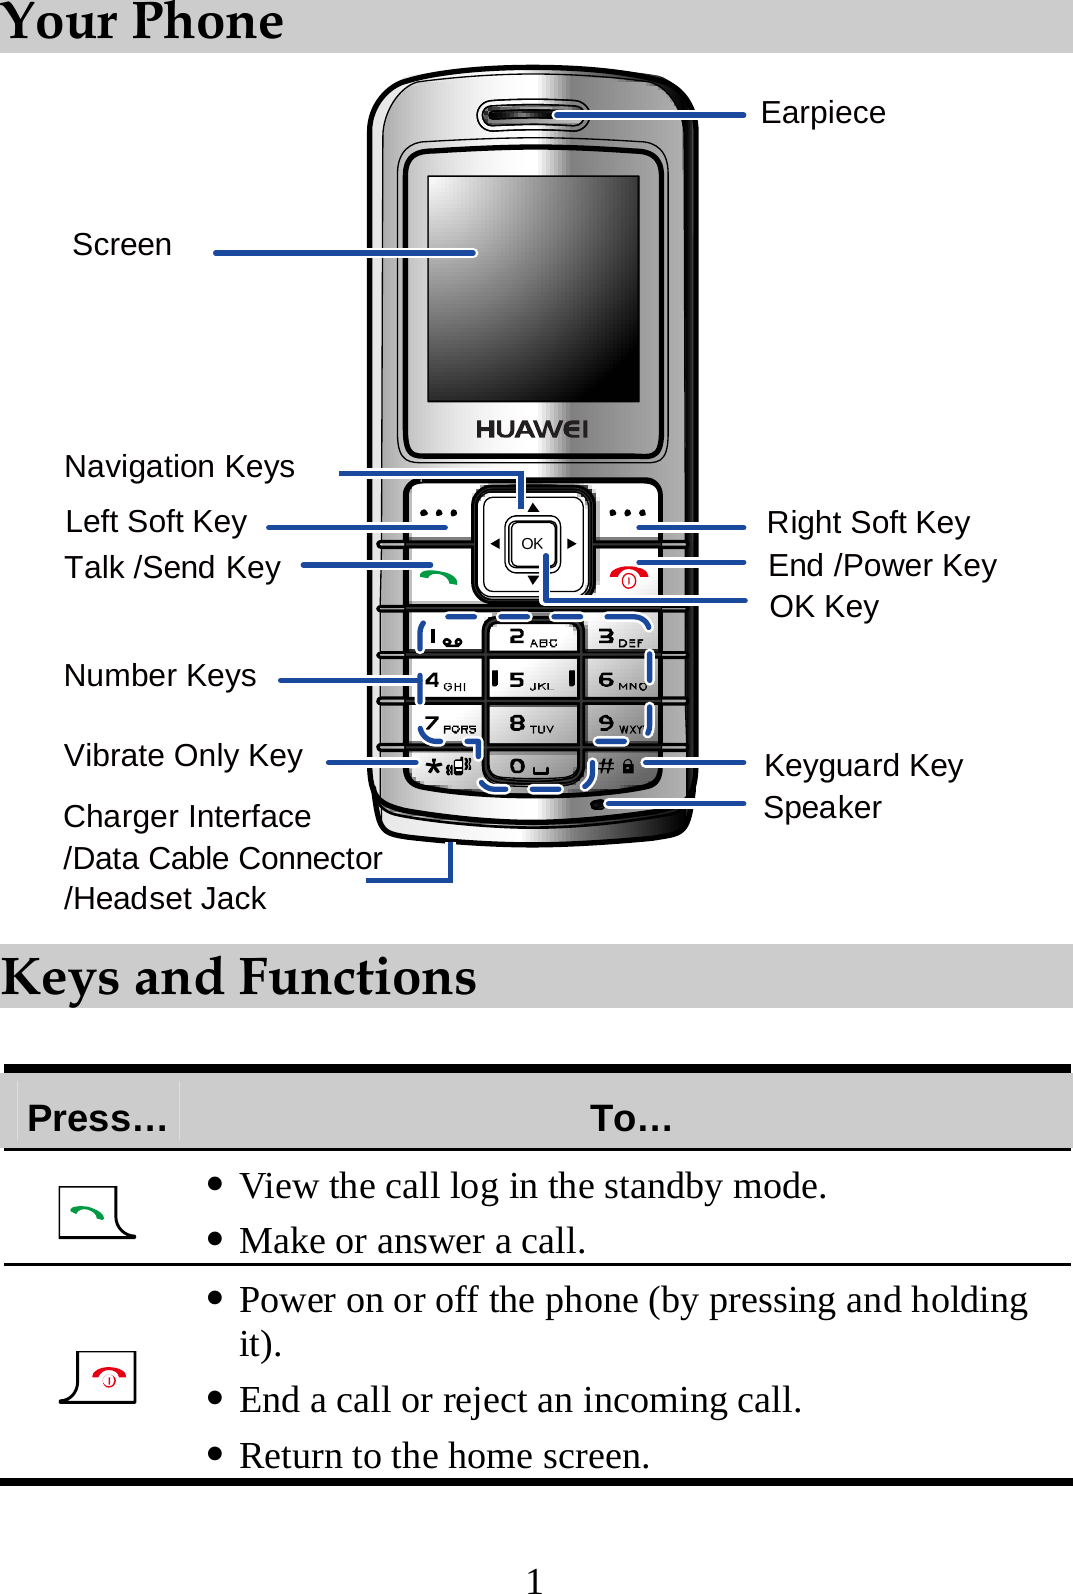 1 Your Phone OKEarpieceNumber KeysNavigation KeysLeft Soft KeyKeyguard KeyRight Soft KeyEnd /Power KeyVibrate Only KeyTalk /Send KeySpeakerOK KeyCharger Interface/Headset JackScreen/Data Cable Connector Keys and Functions  Press…  To…  z View the call log in the standby mode. z Make or answer a call.  z Power on or off the phone (by pressing and holding it). z End a call or reject an incoming call. z Return to the home screen. 